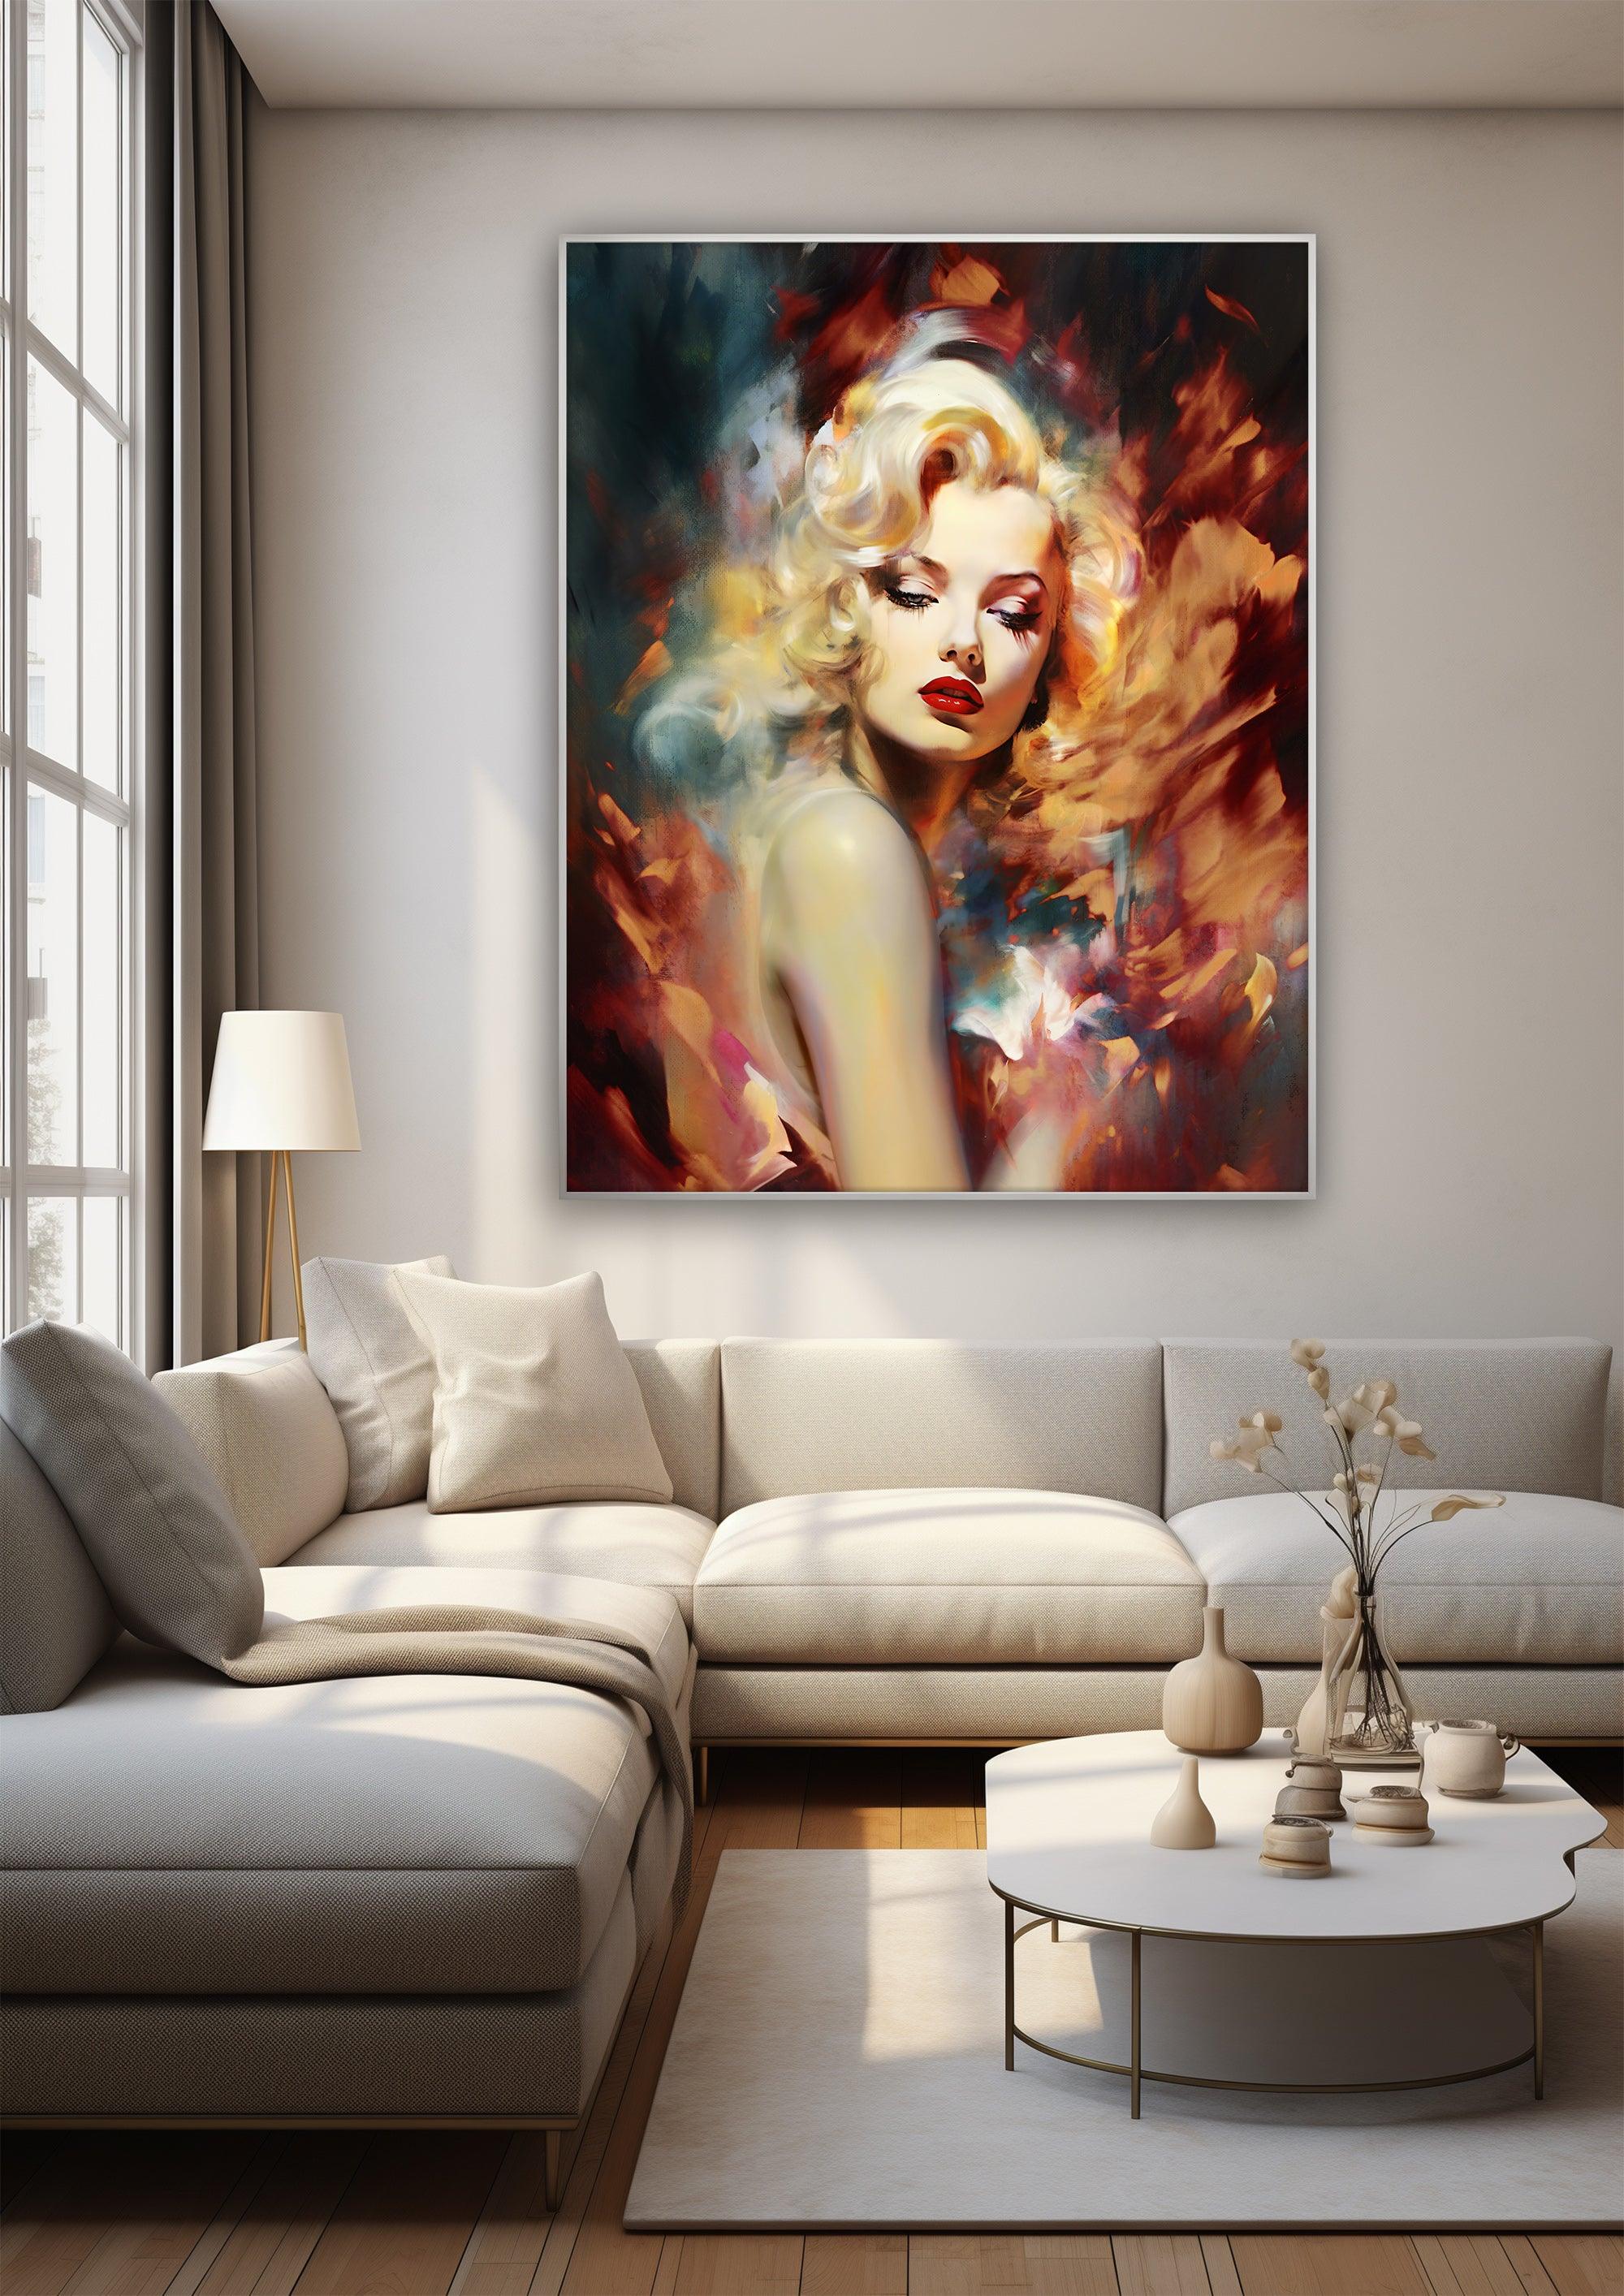 Monroe，Hand Painted Colorful Decorative Canvas Artwork，Moody Wall Decor，Cotton Gloss Canvas Living Room Decor，High-Quality Waterproof Decorative Canvas Art